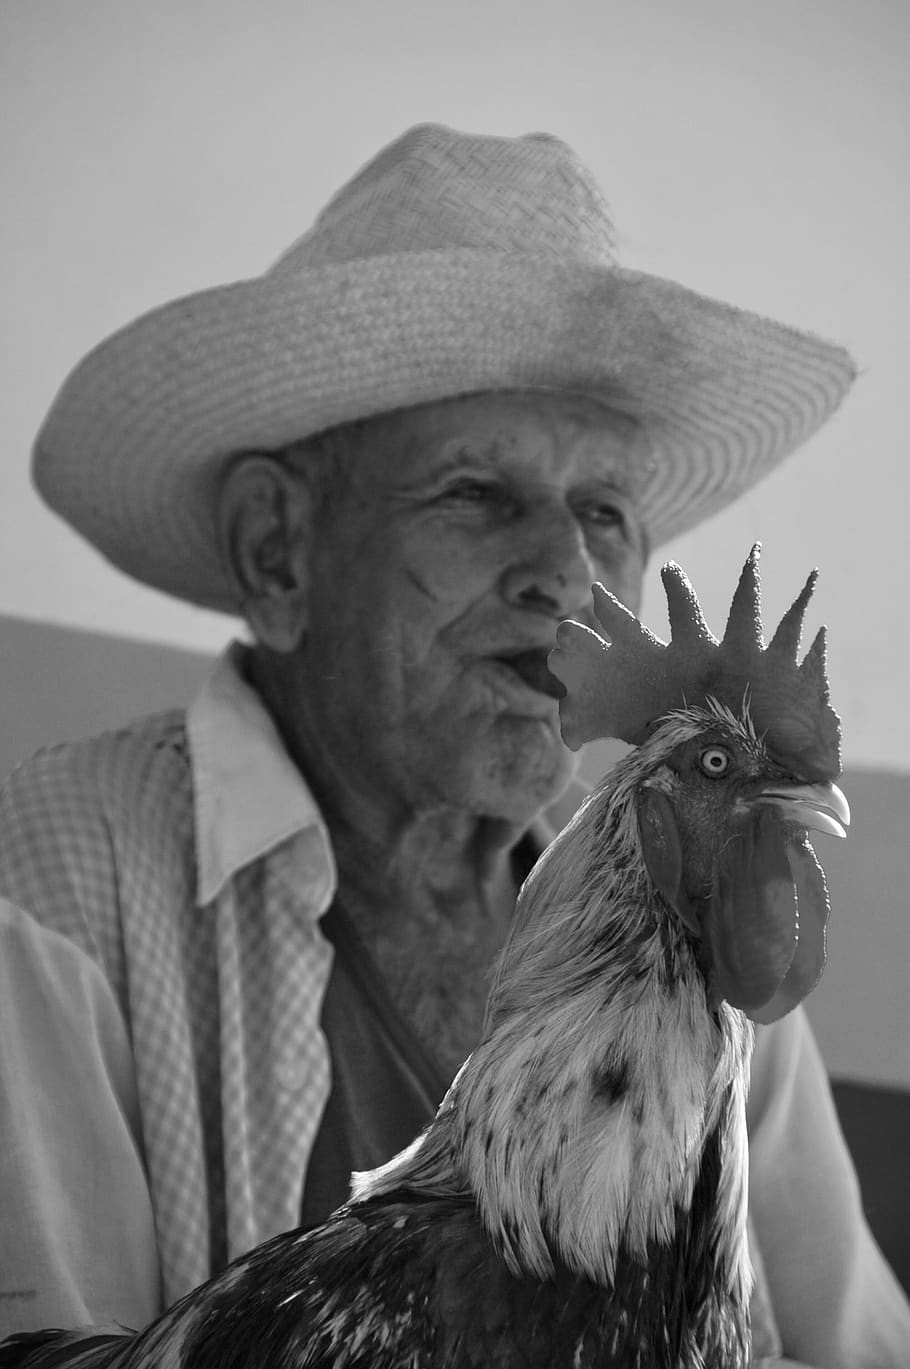 grayscale photo of man wearing straw hat holding rooster, clothing